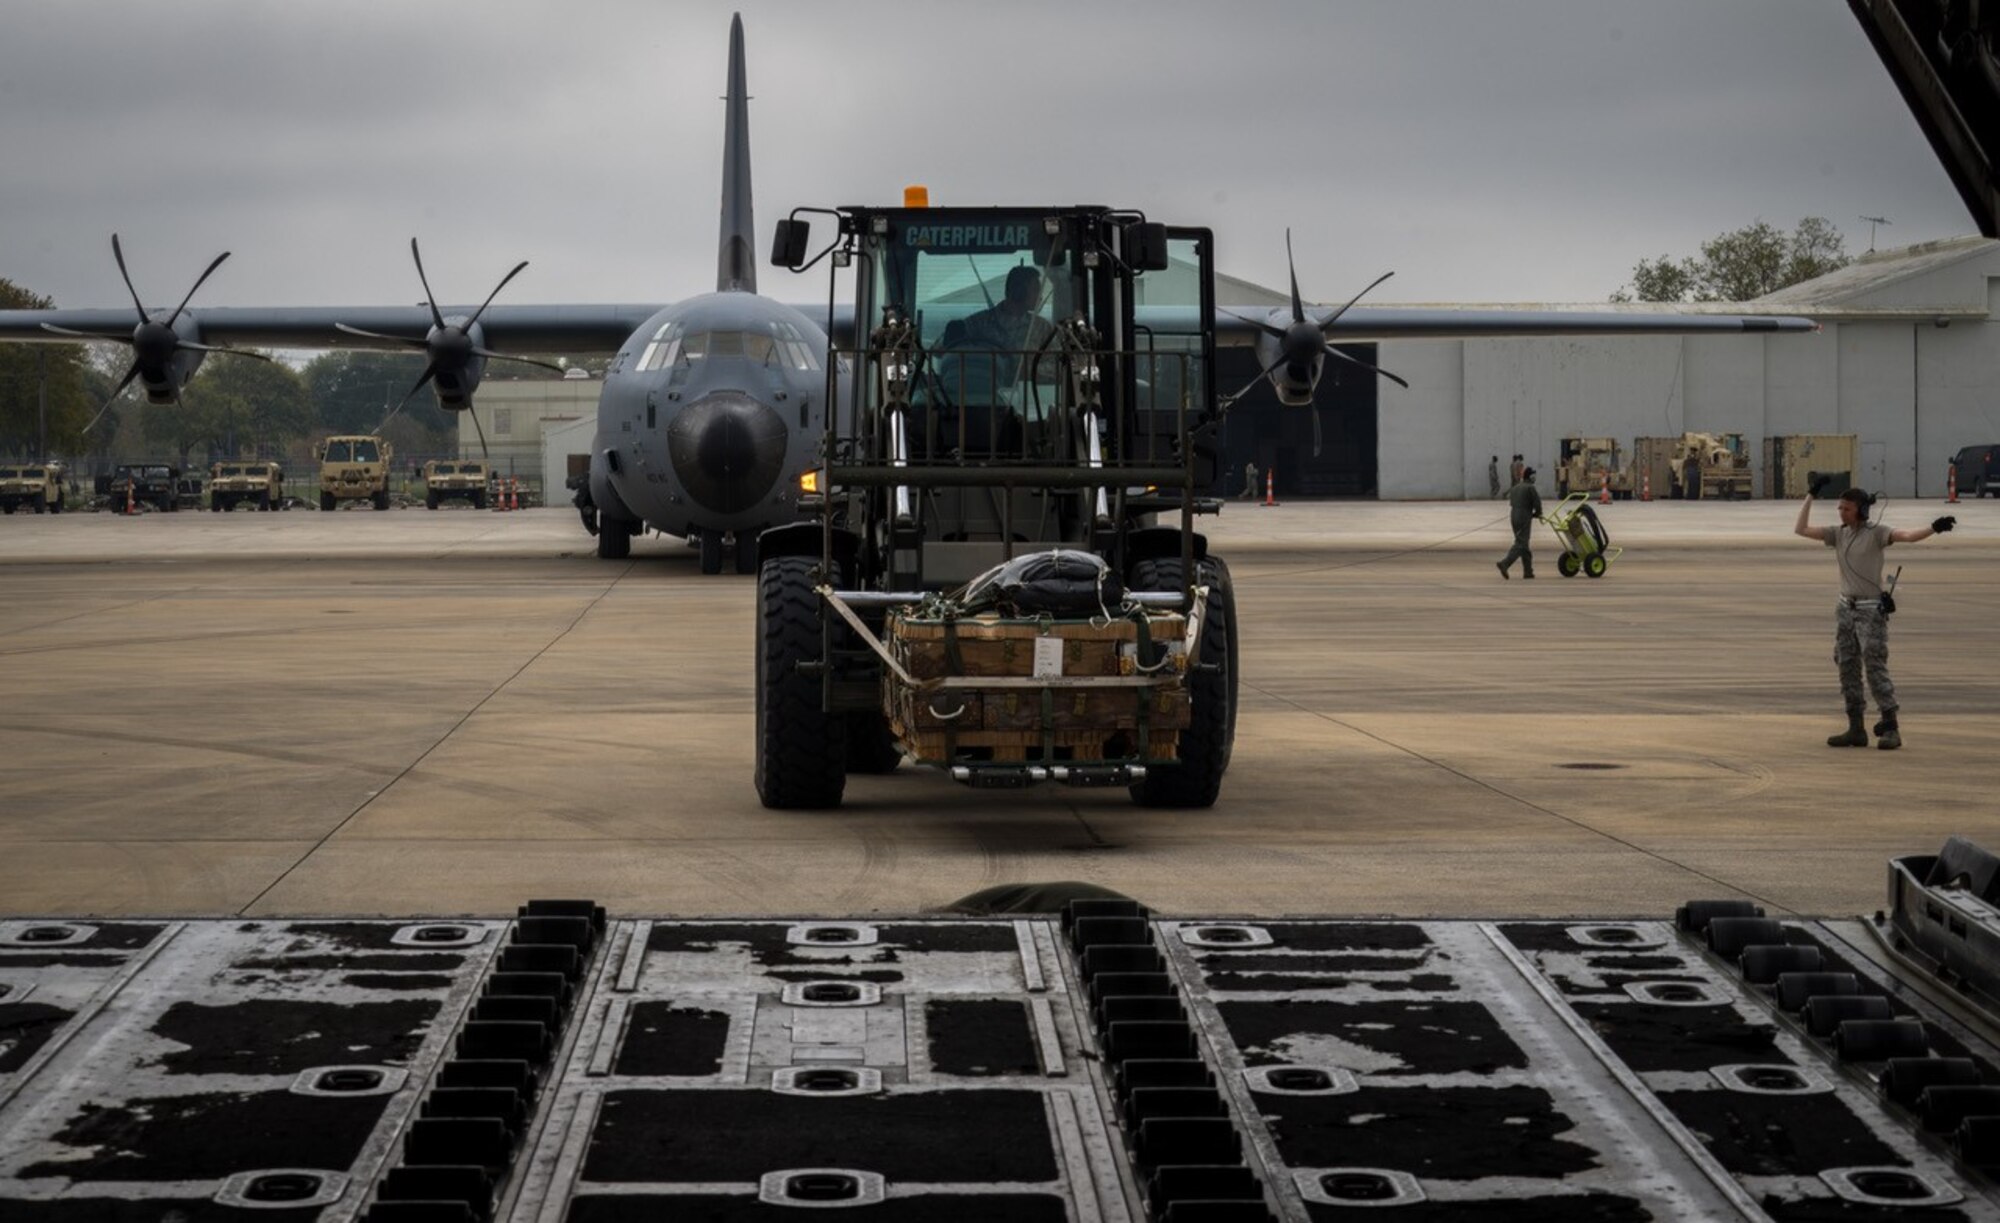 Airmen load a pallet of supplies onto a C-130J Super Hercules aircraft during the Green Flag Little Rock 17-05 exercise March 19 iin Alexandria, Louisiana. The supplies were for U.S. Army troops participating in the deployment simulation. (U.S. Air Force photo/Staff Sgt. Shelton Sherrill)